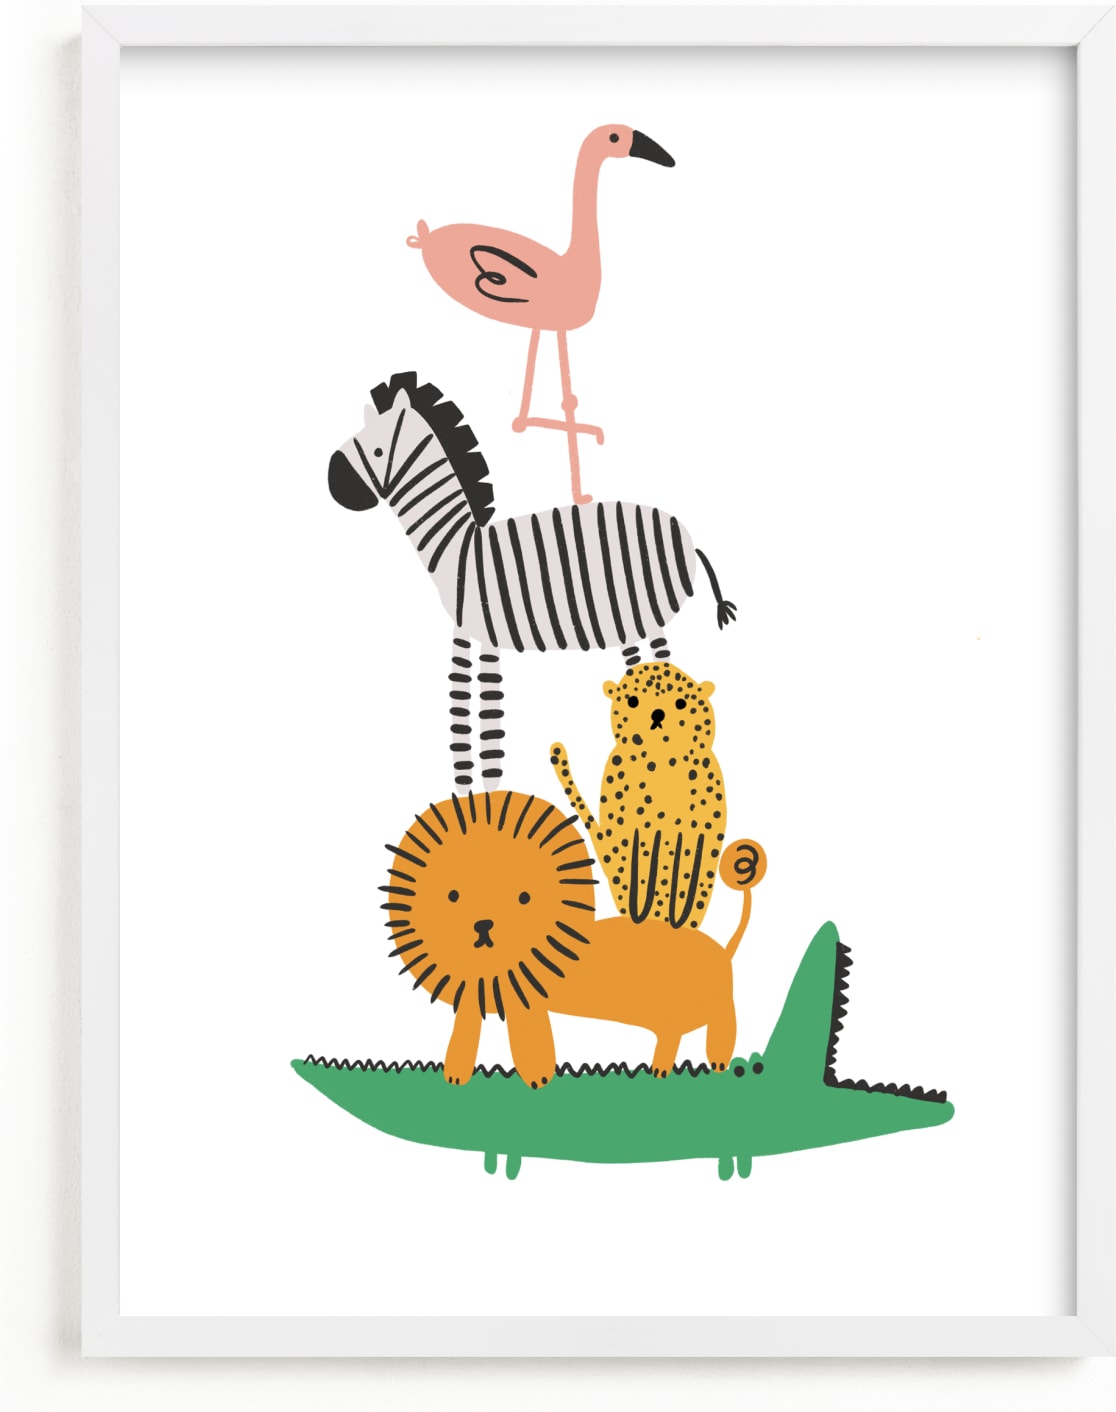 This is a blue kids wall art by Caitlin Considine called Safari Stack.